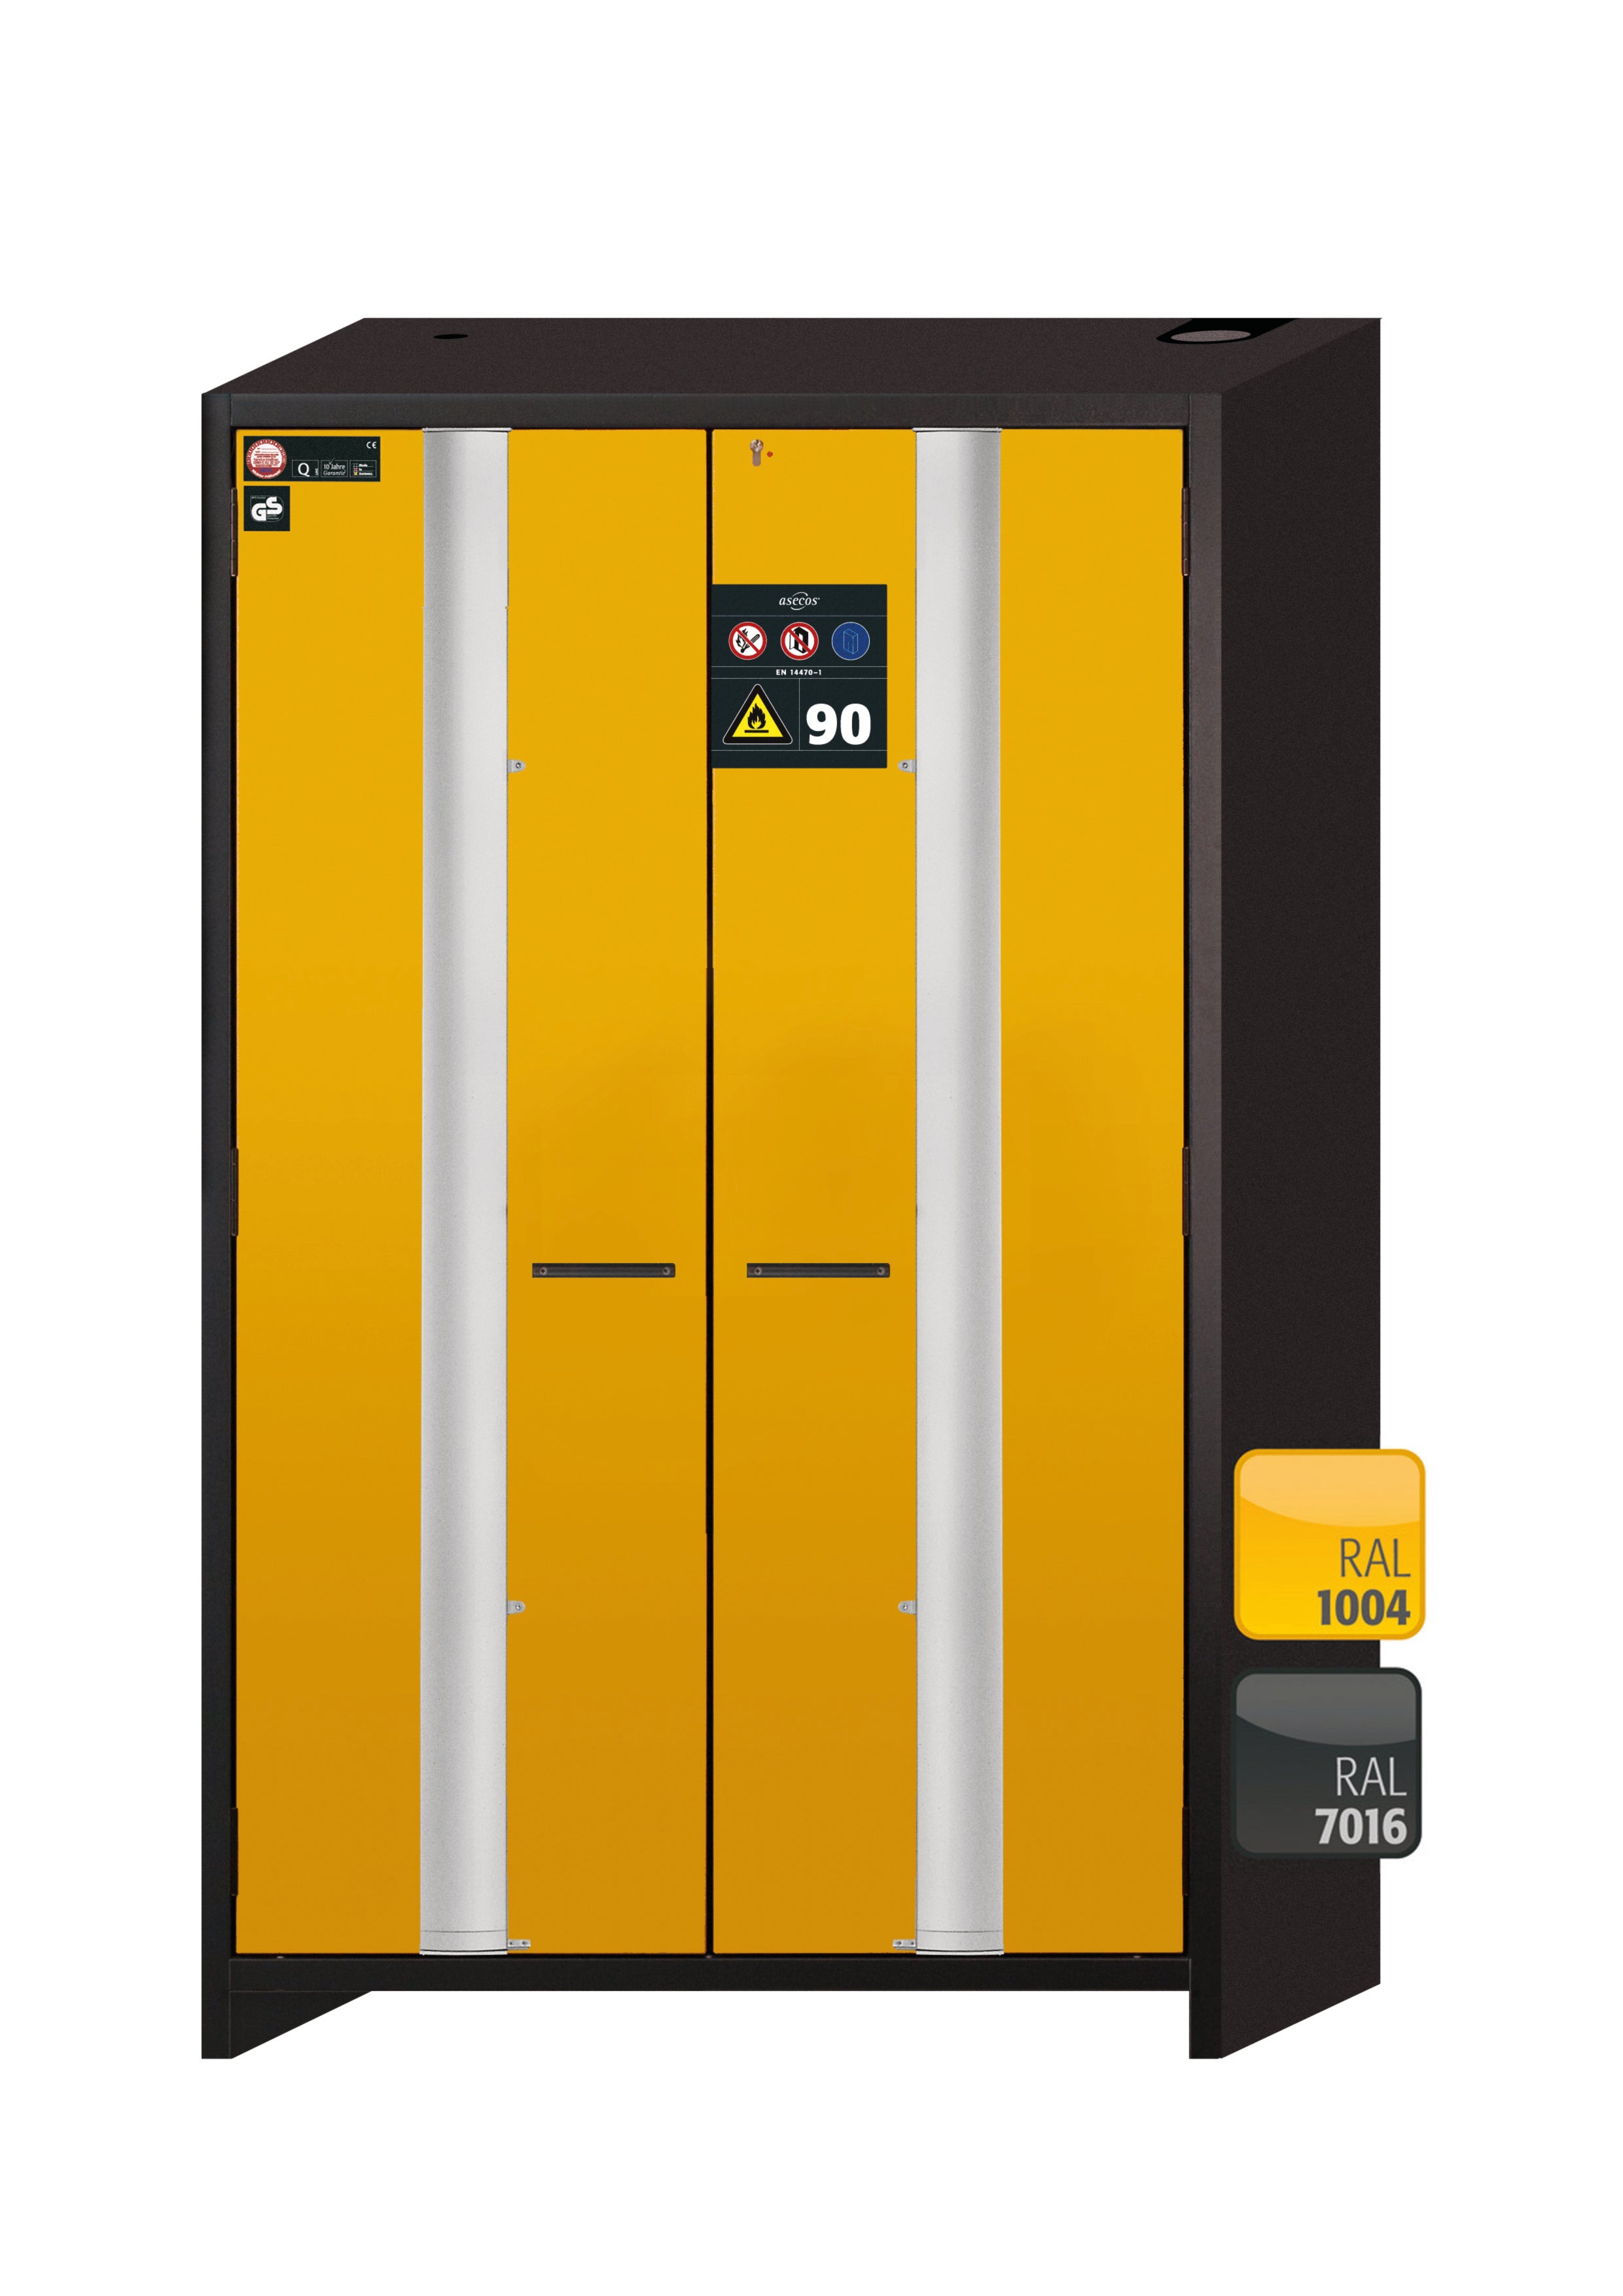 Type 90 safety cabinet Q-PHOENIX-90 model Q90.195.120.FD in safety yellow RAL 1004 with 5x standard pull-out tray (sheet steel)